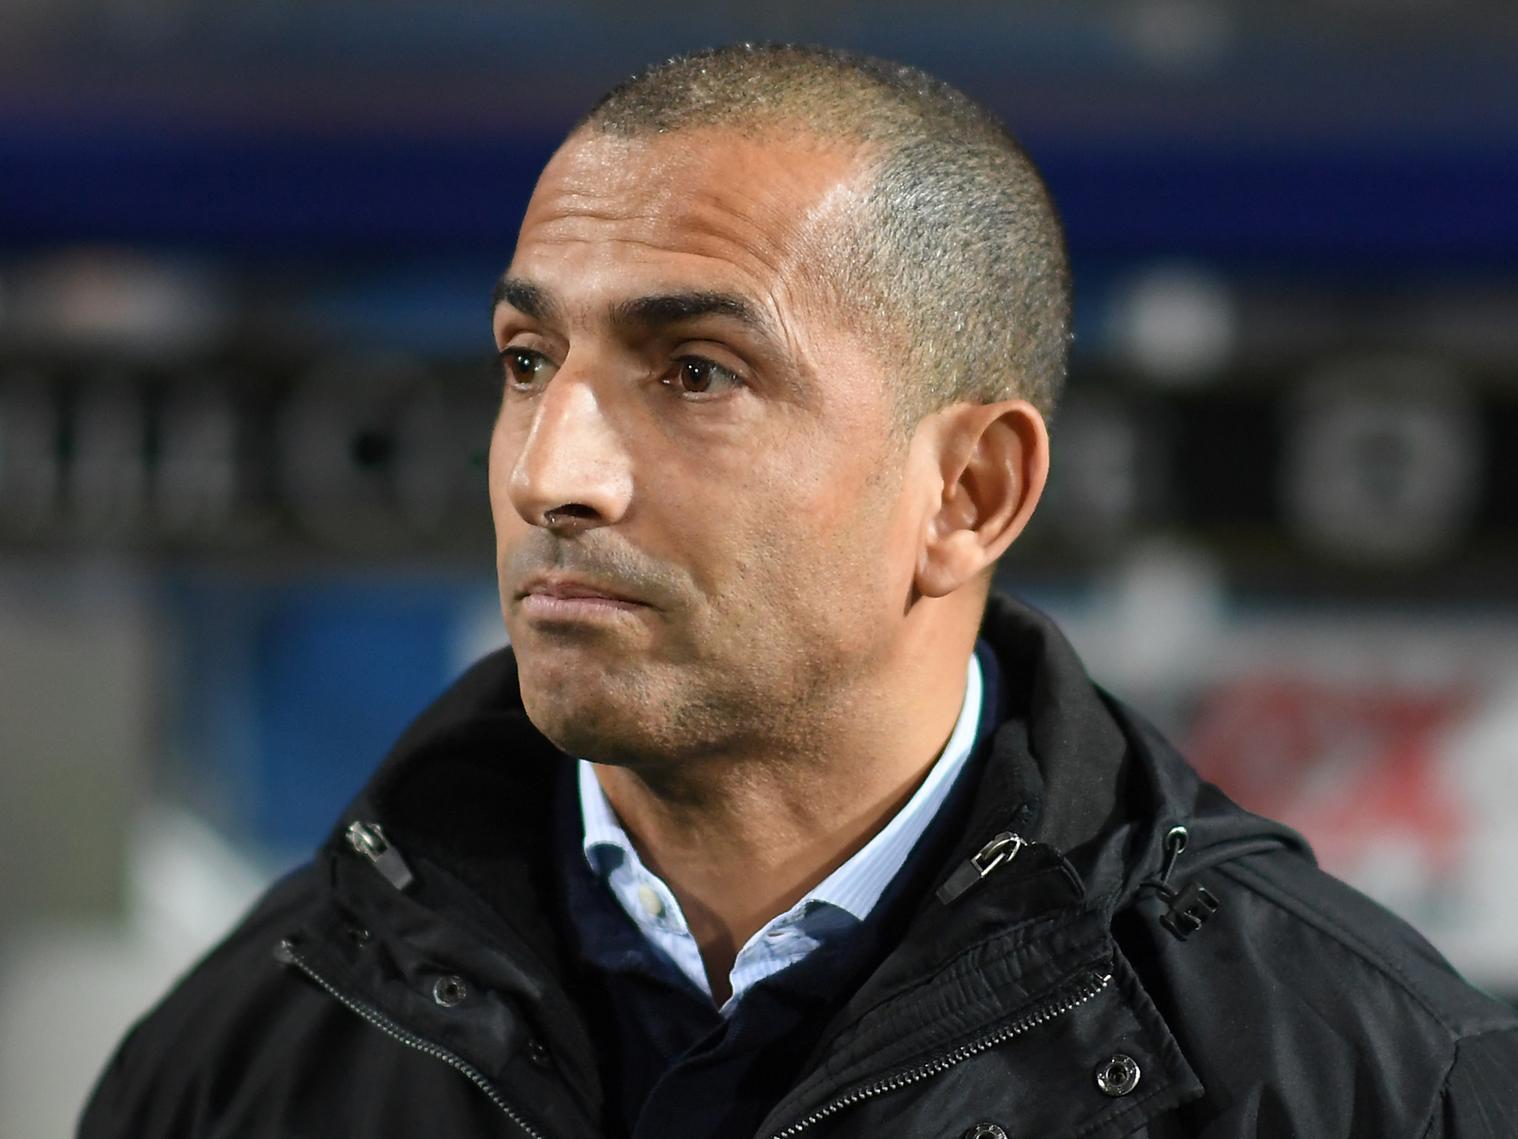 Watford are said to have their sights set on luring Sabri Lamouchi away from Nottingham Forest, as they continue their efforts to find a manager capable of saving them from relegation. (L'Equipe)